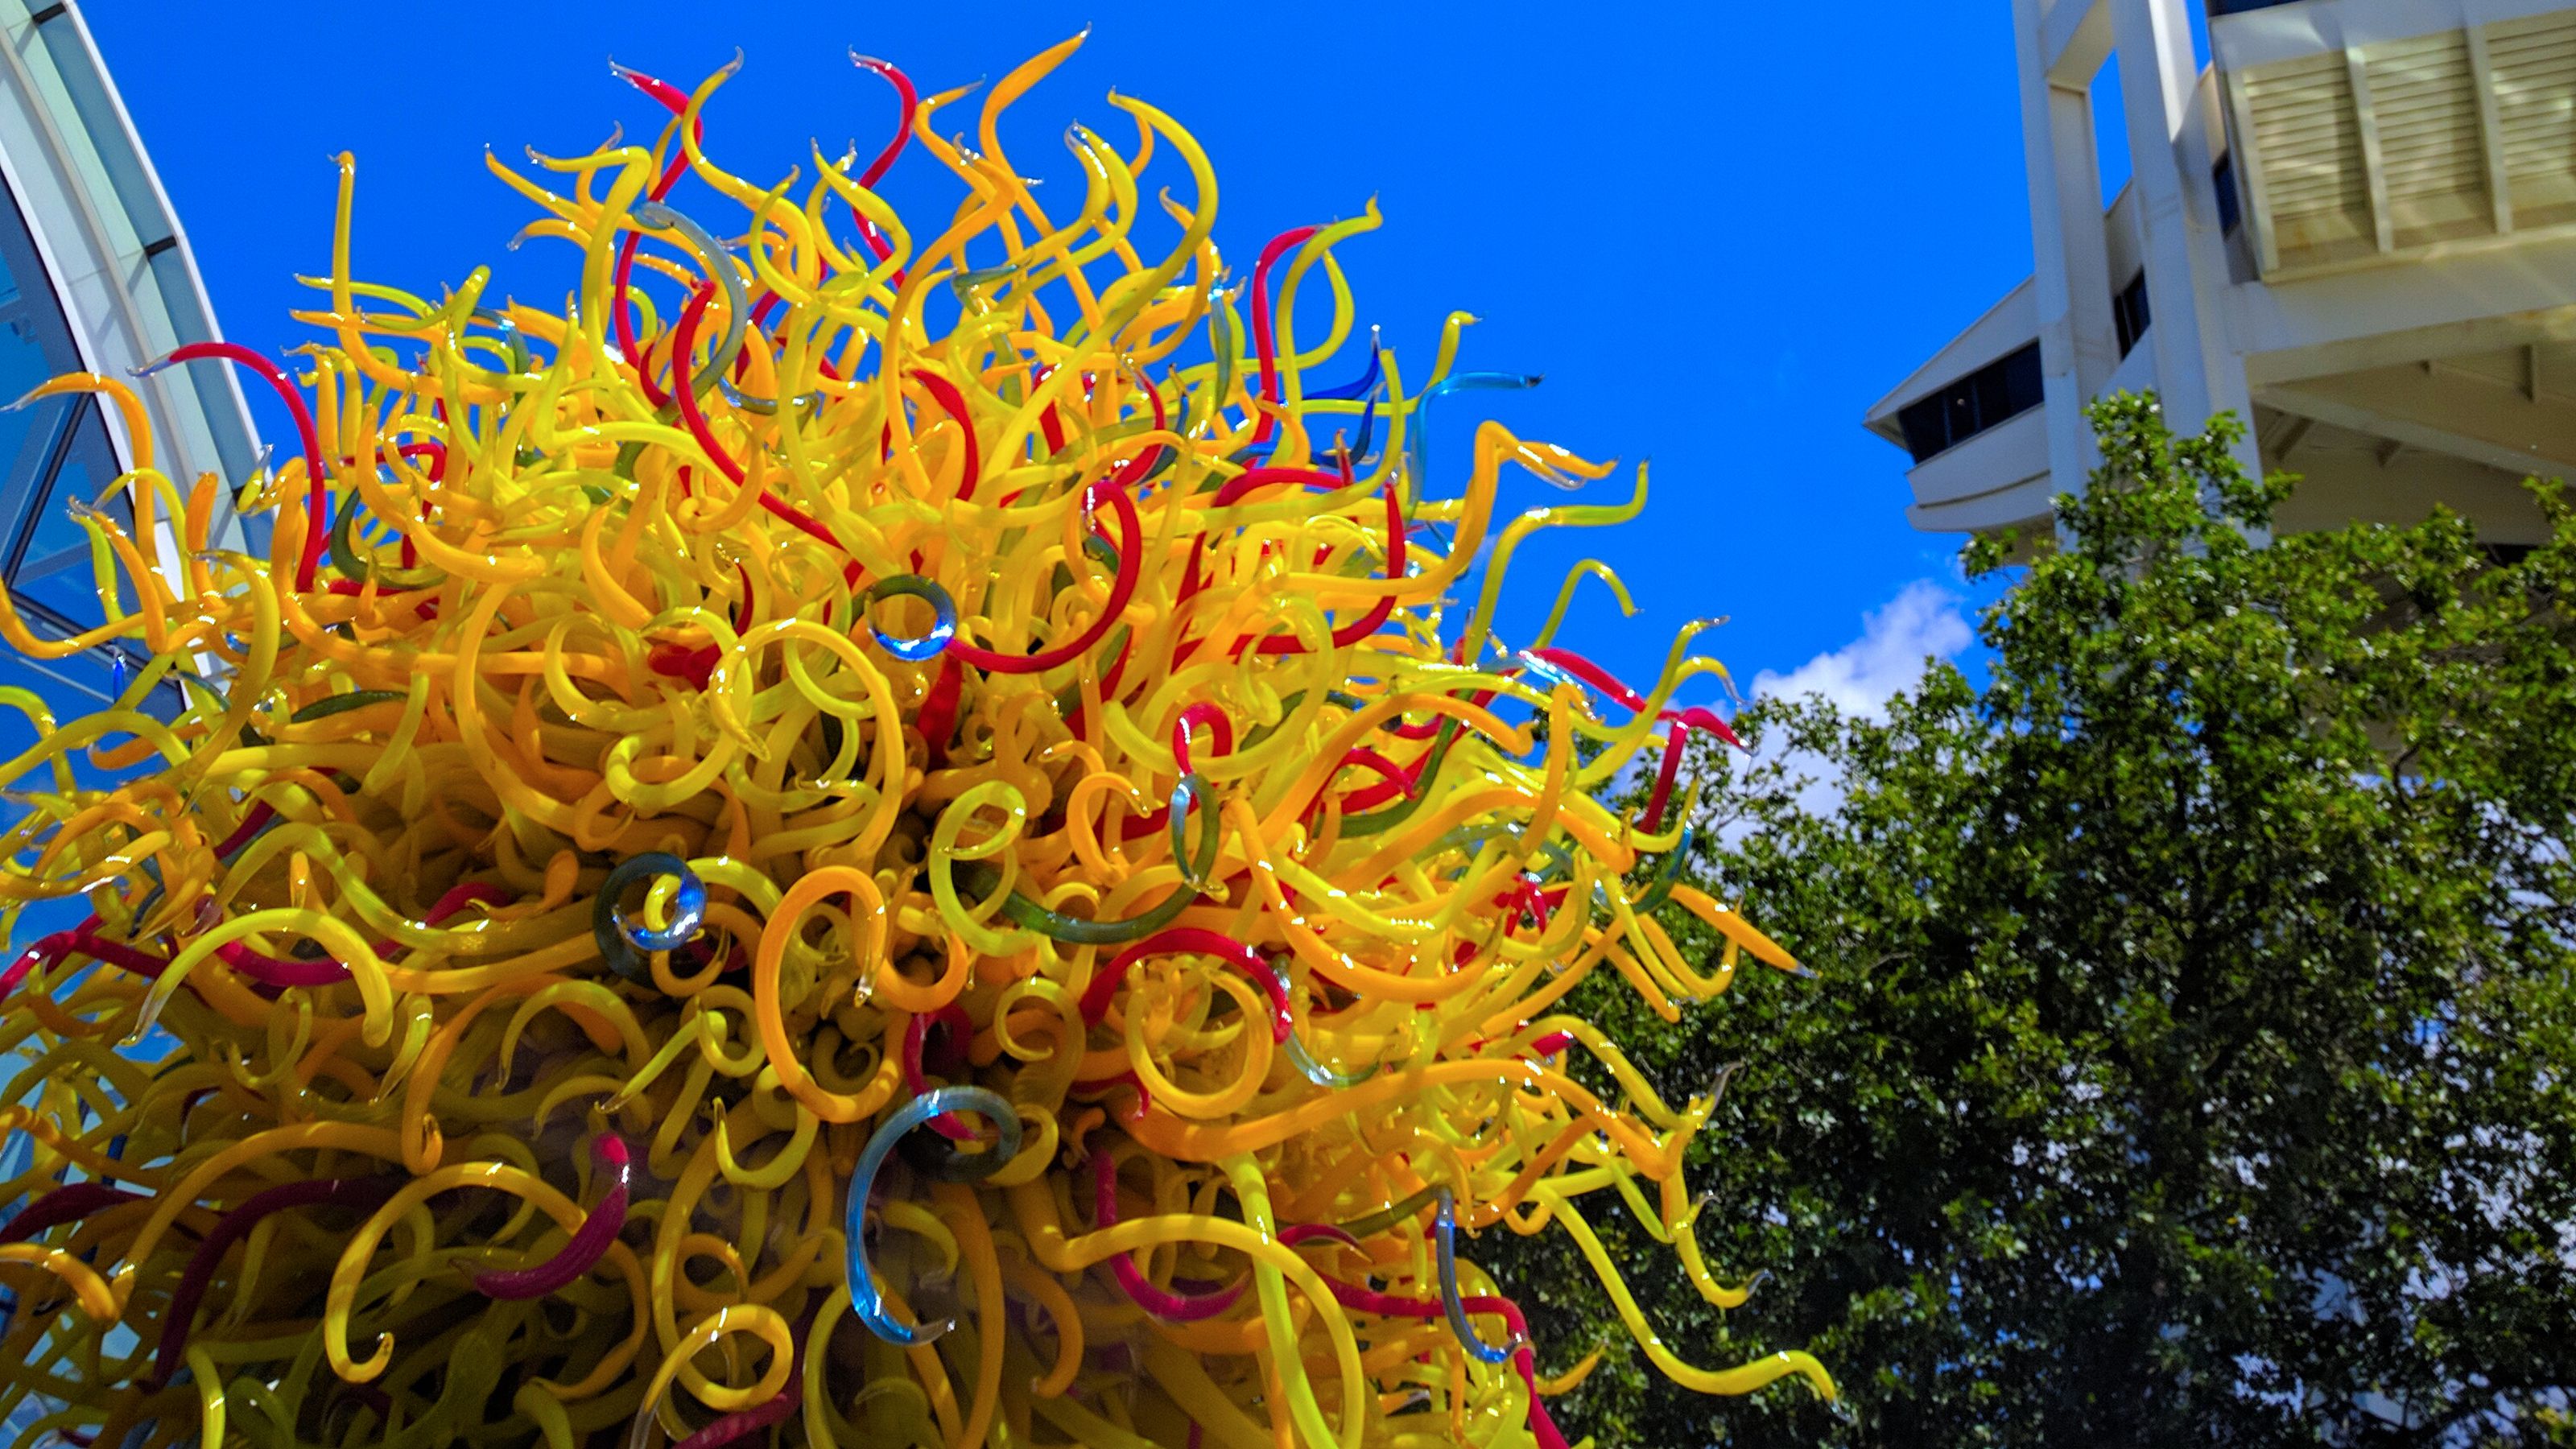 Vibrant glass sculpture with twisting yellow and red tendrils under a blue sky, adjacent to the Space Needle.